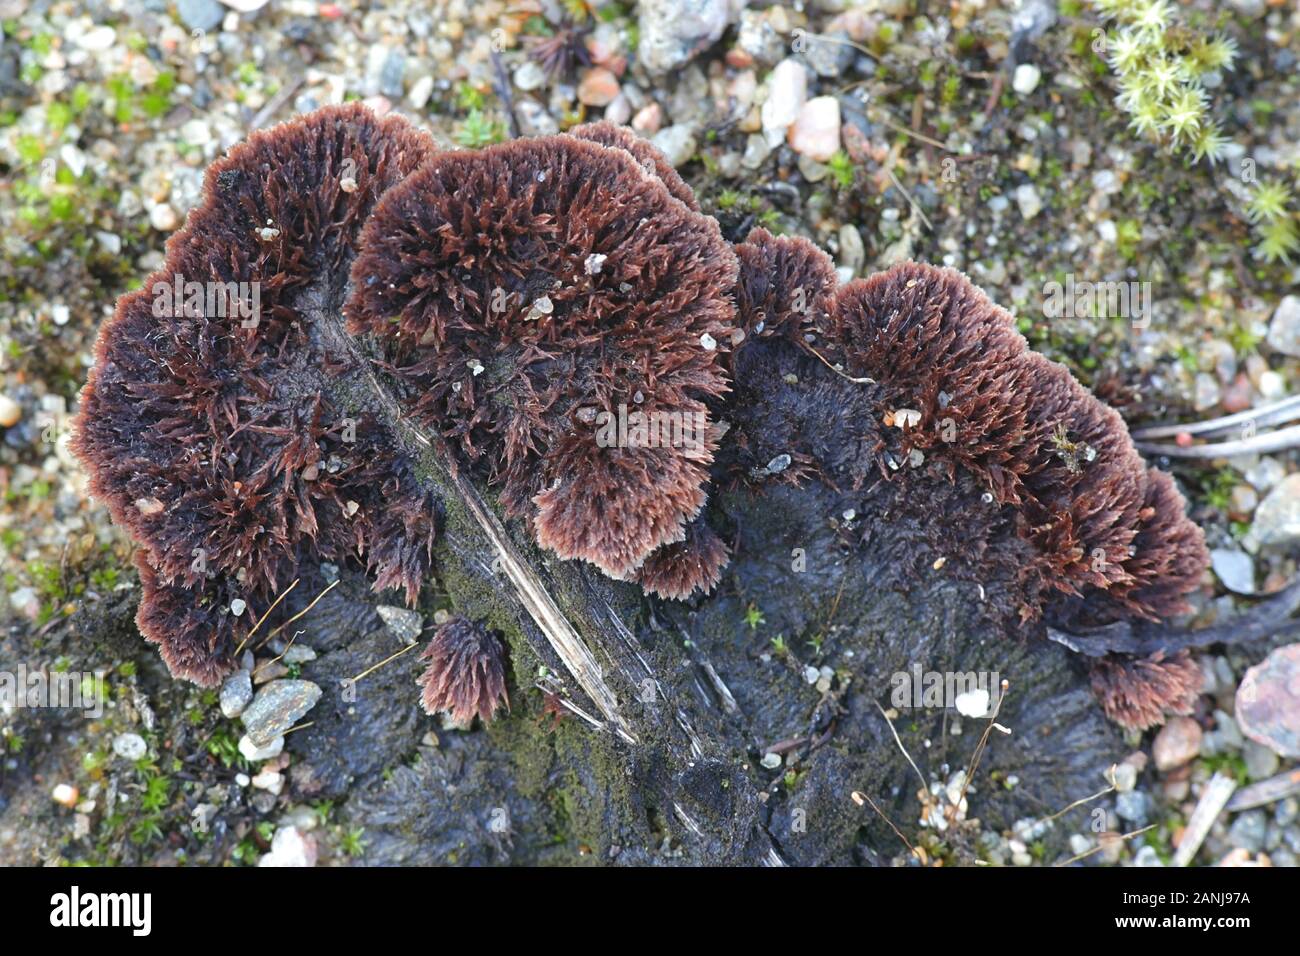 Thelephora terrestris, known as the Earthfan fungus, wild mushrooms from Finland Stock Photo